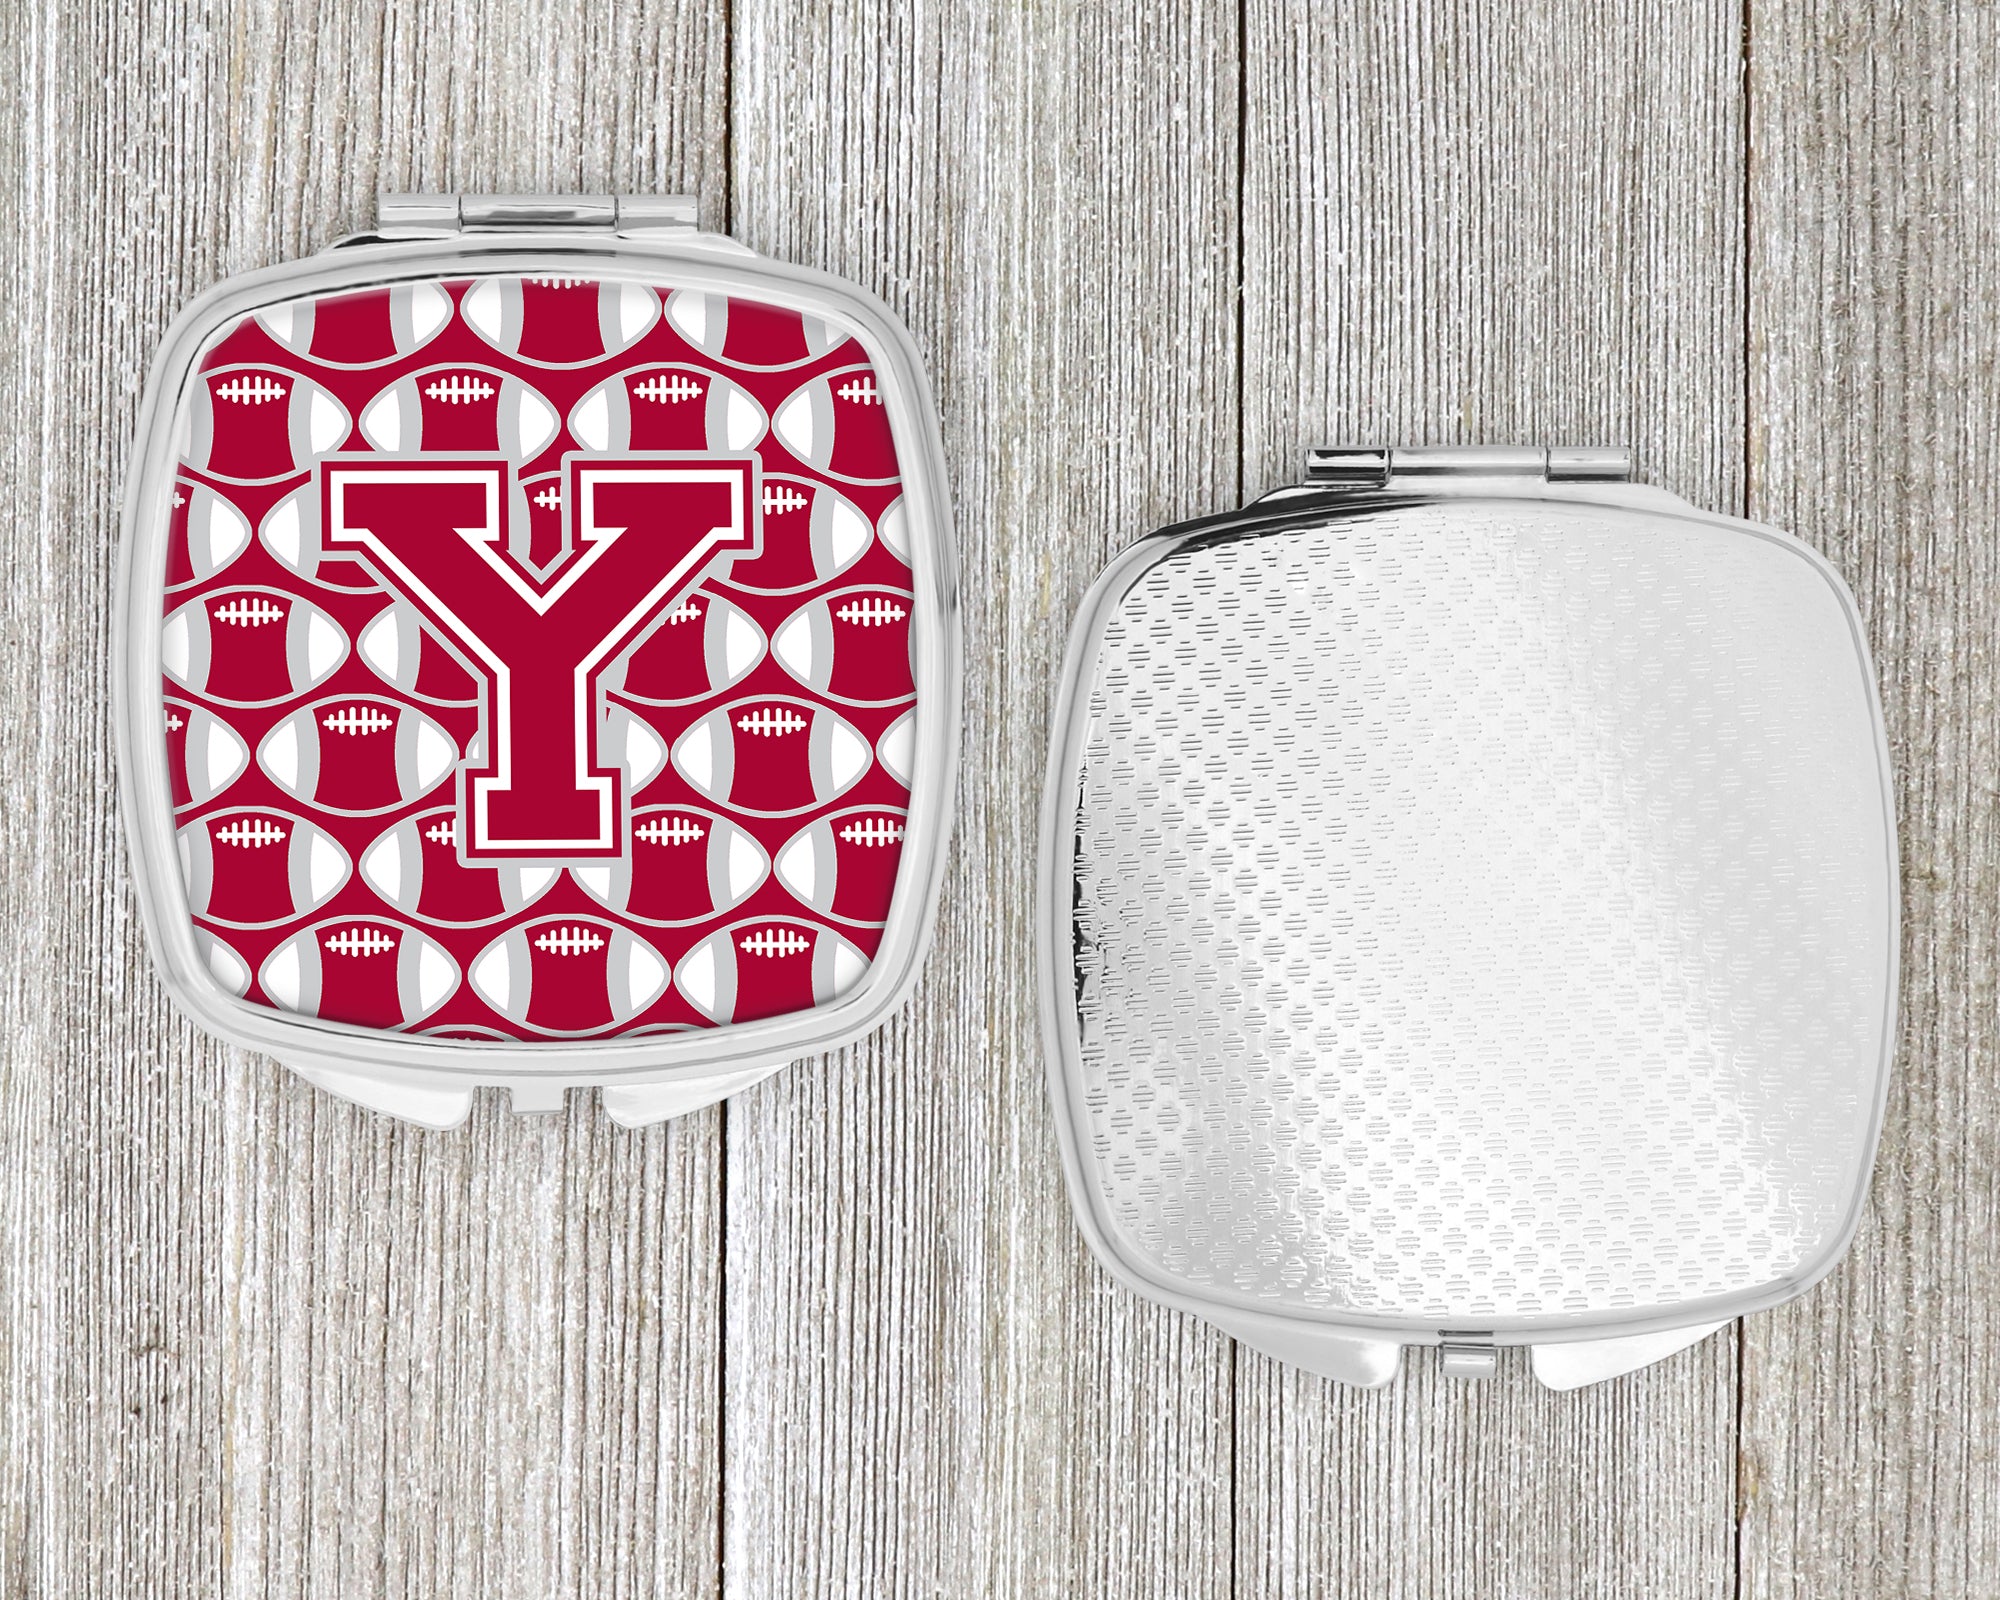 Letter Y Football Crimson, grey and white Compact Mirror CJ1065-YSCM  the-store.com.